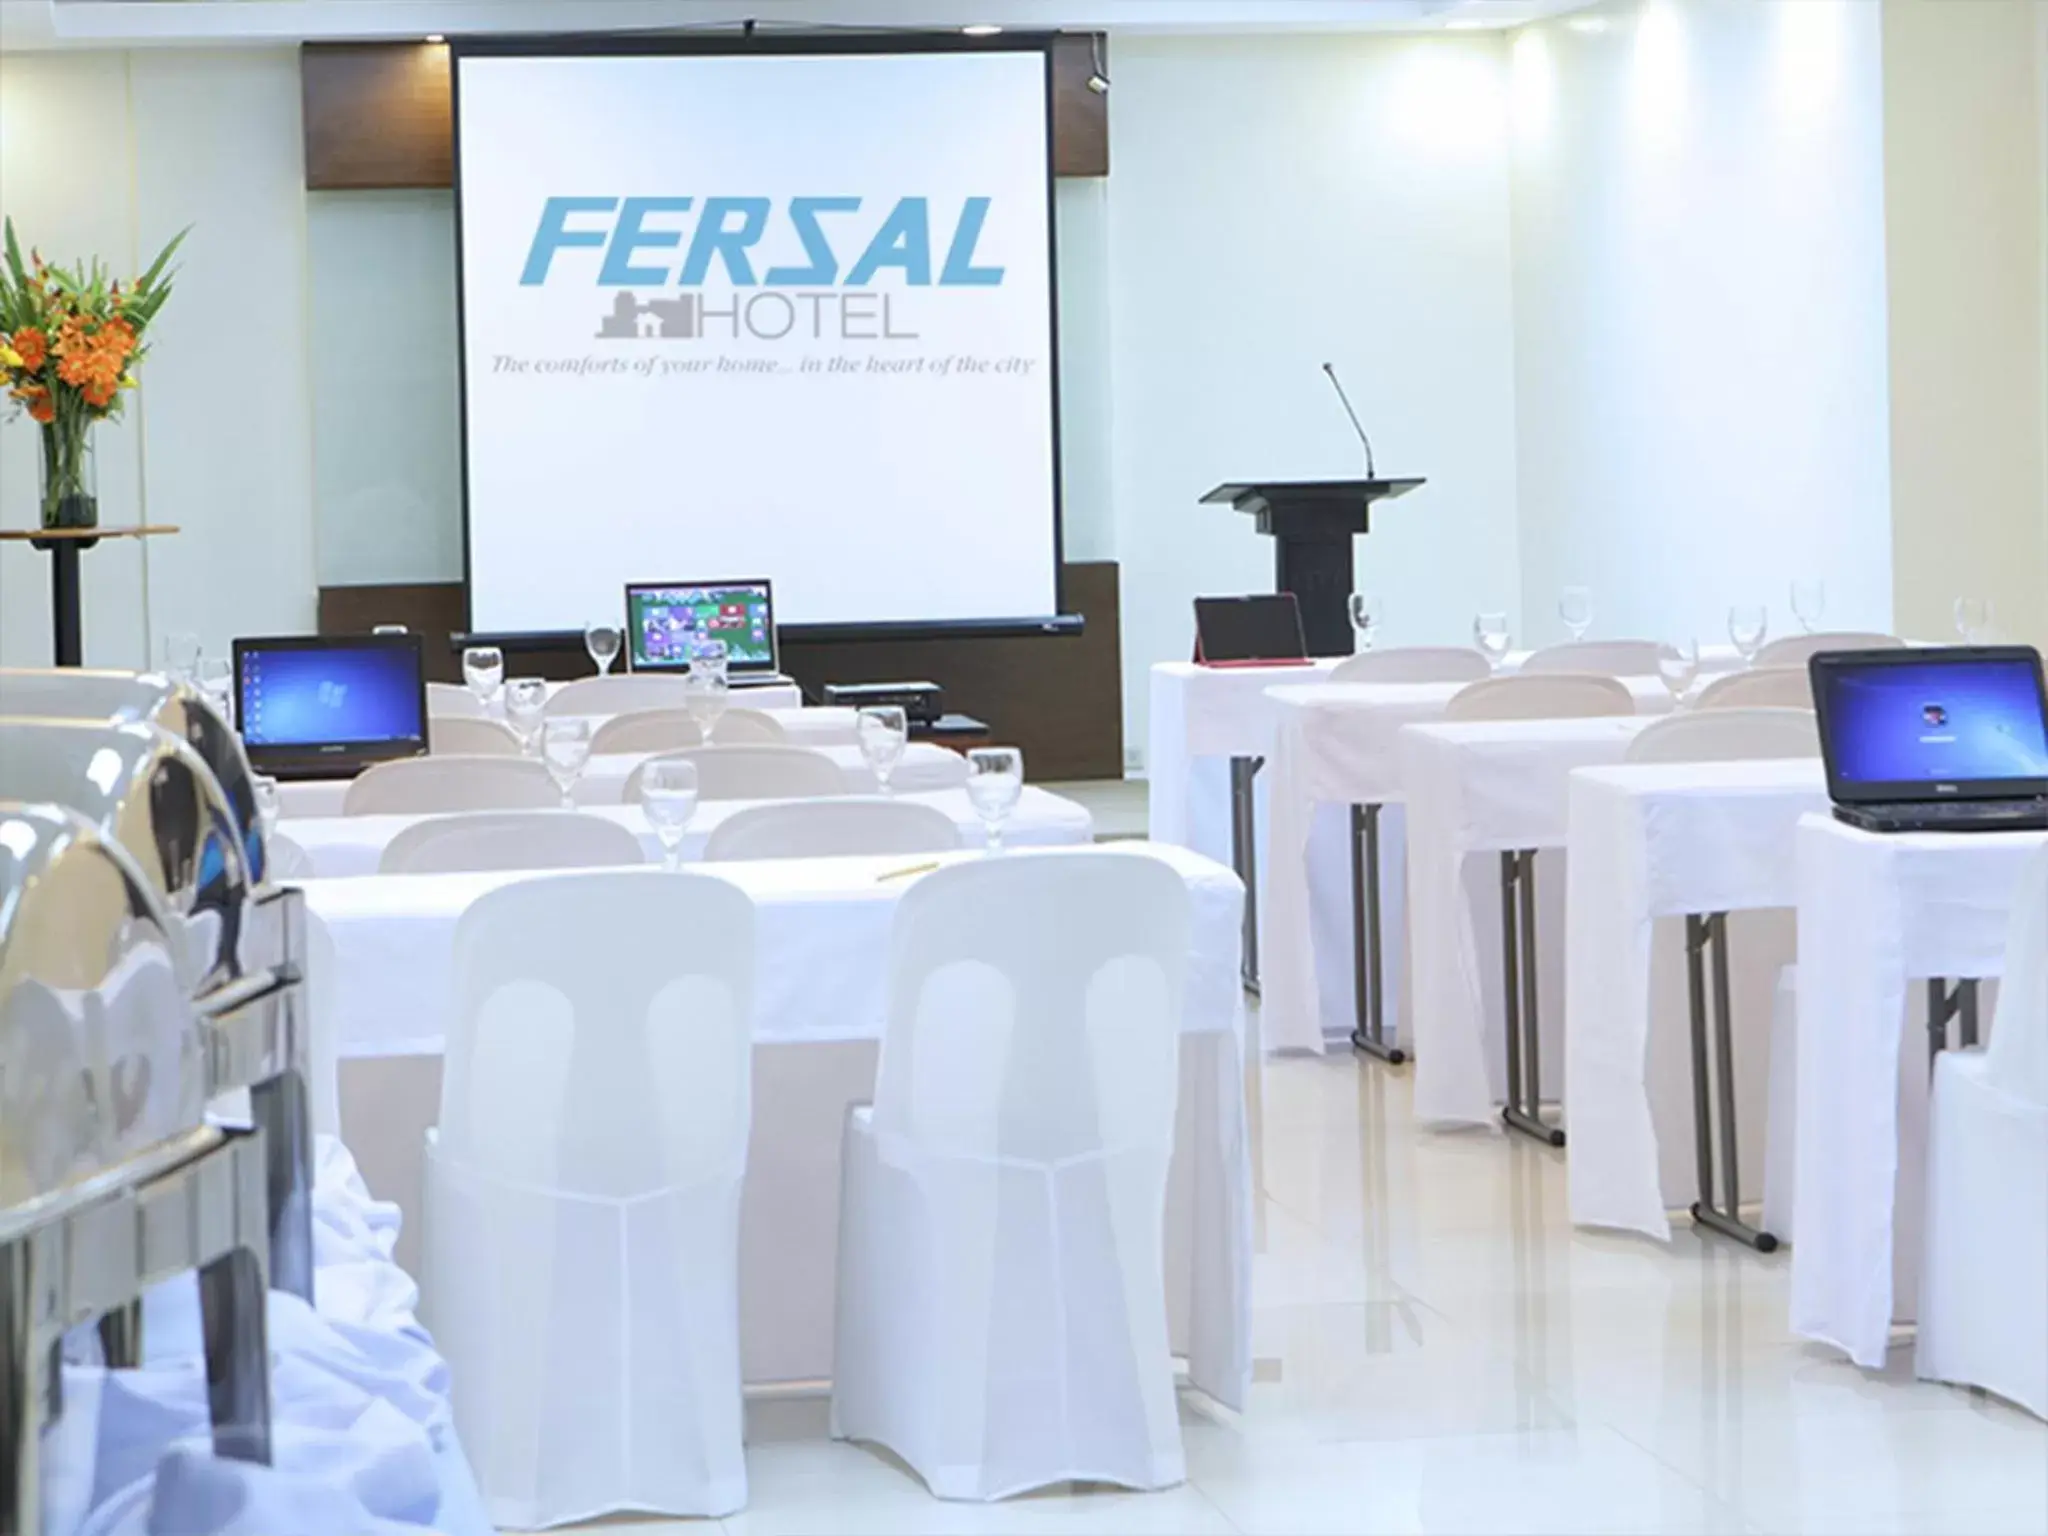 Meeting/conference room in Fersal Hotel - P. Tuazon Cubao